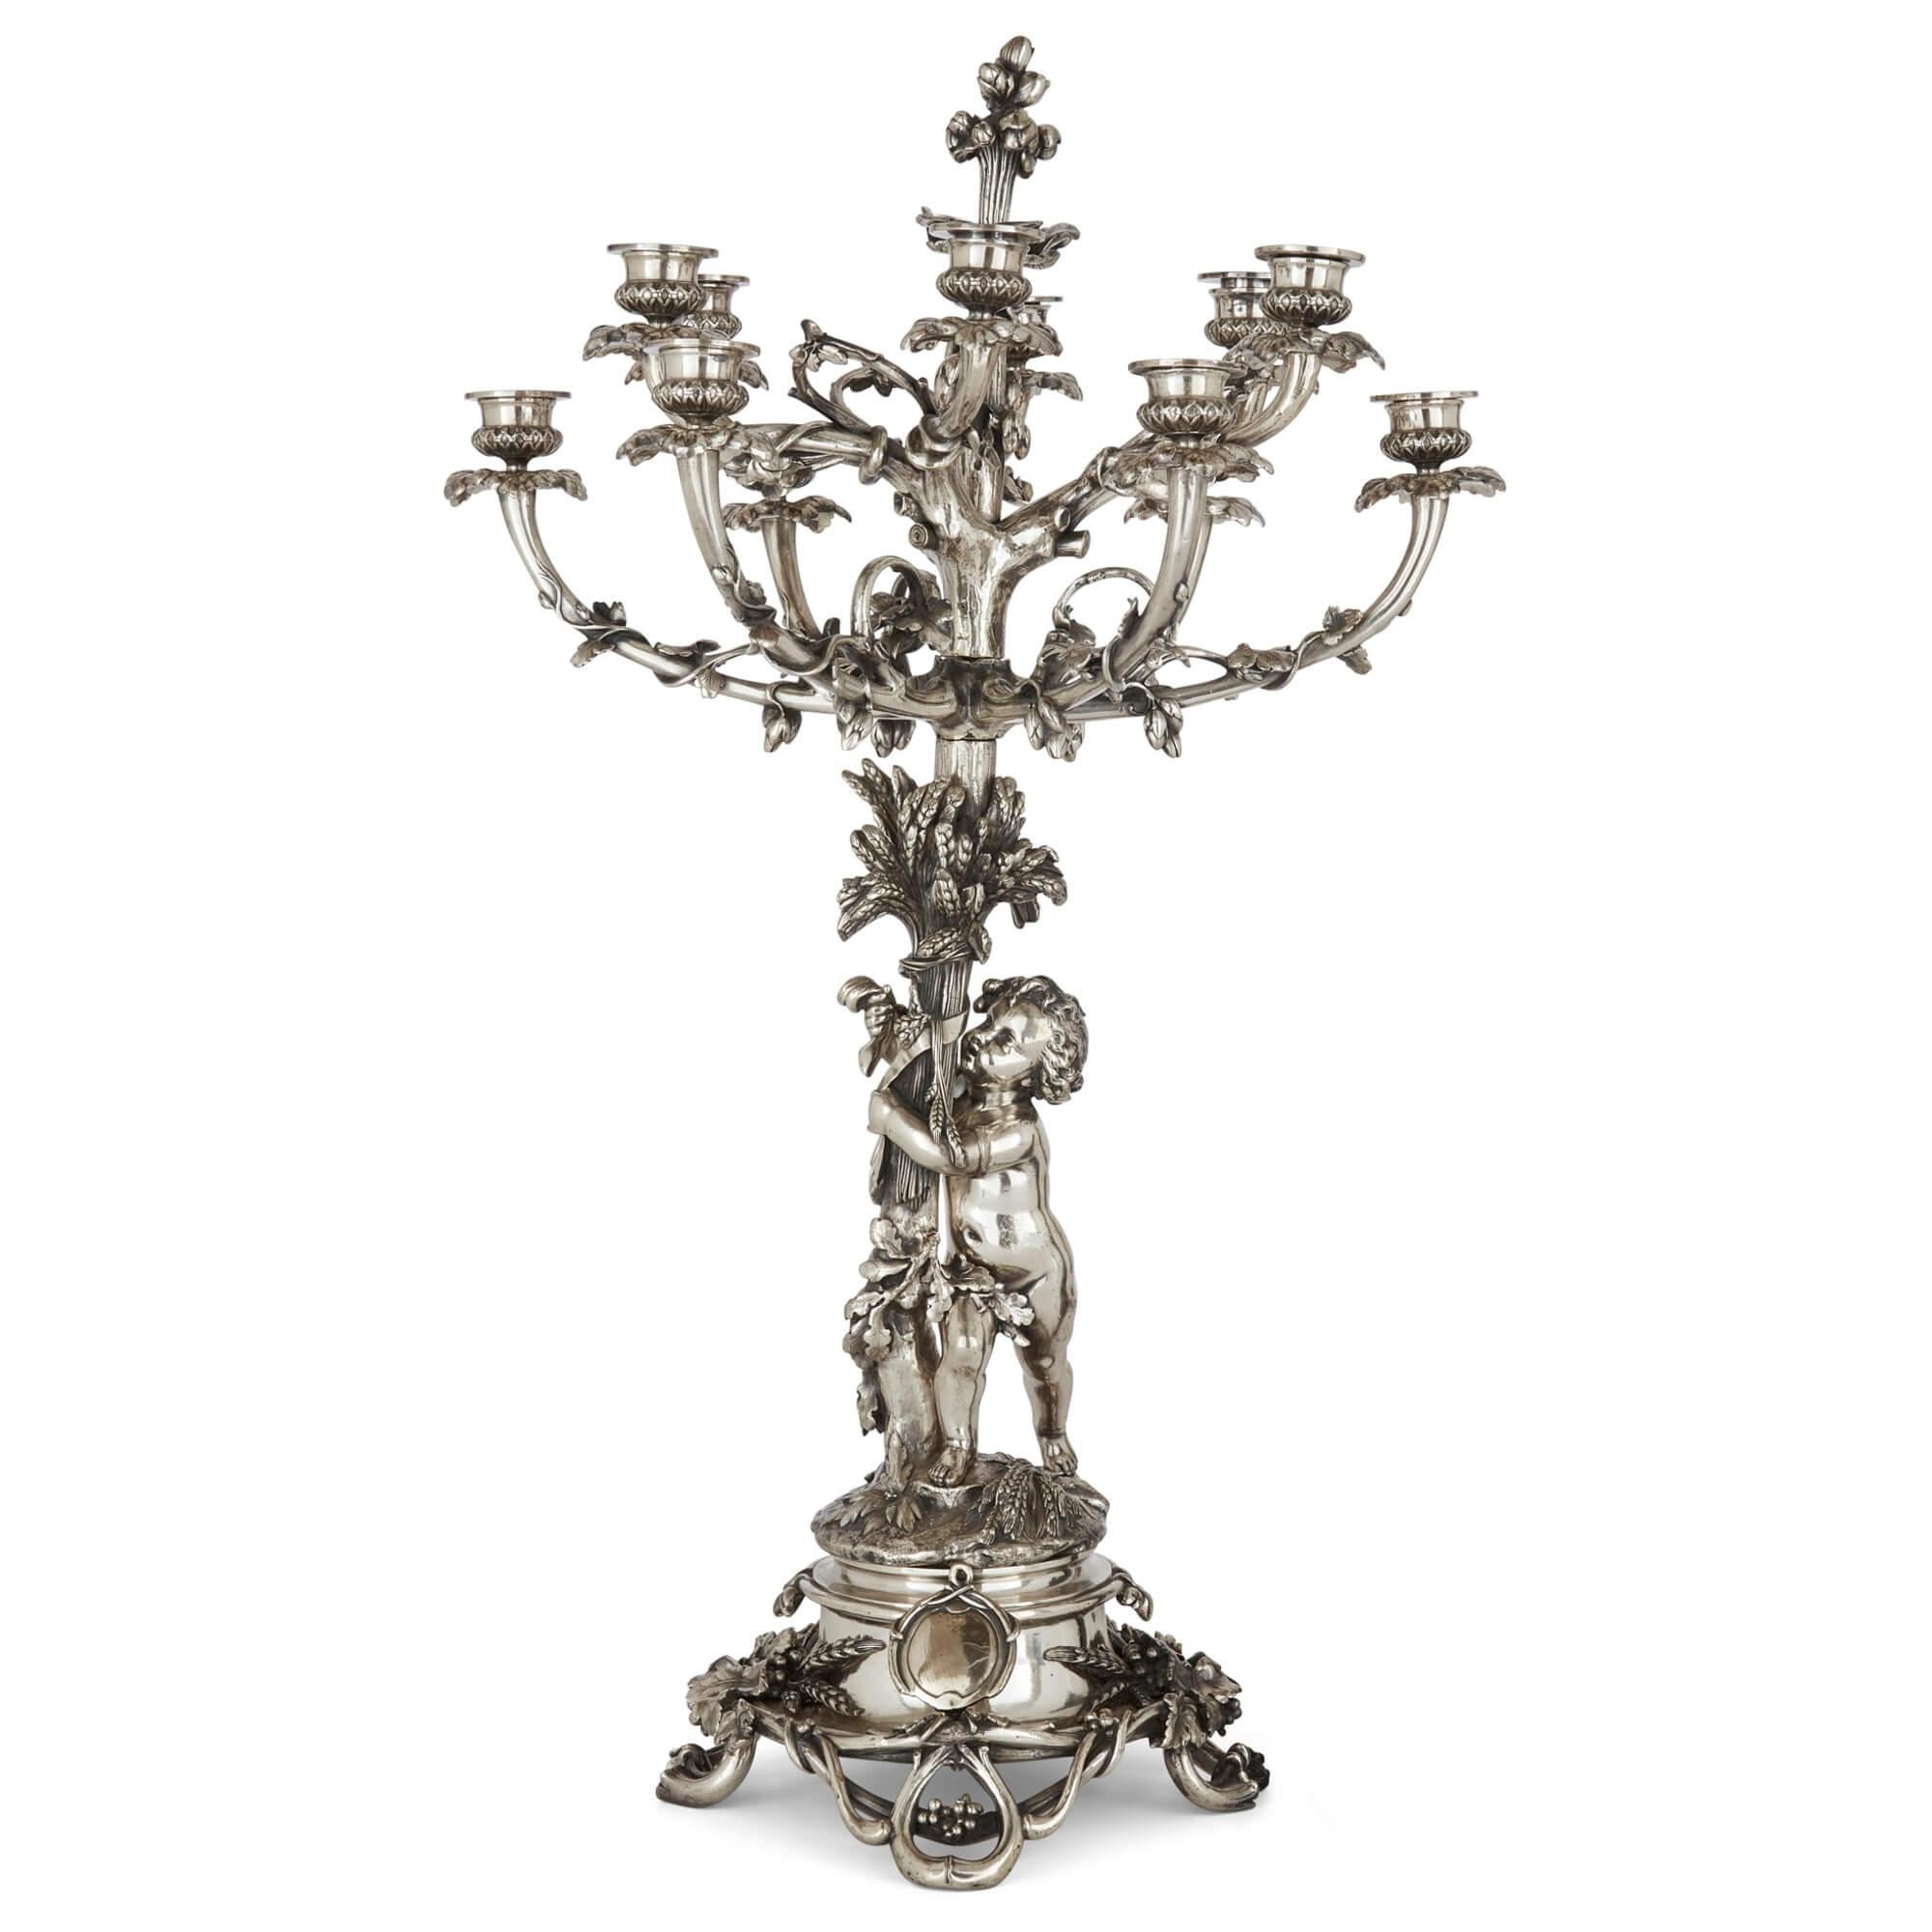 Rococo Revival Pair of Large Silvered Bronze Candelabra by Christofle, 19th Century For Sale